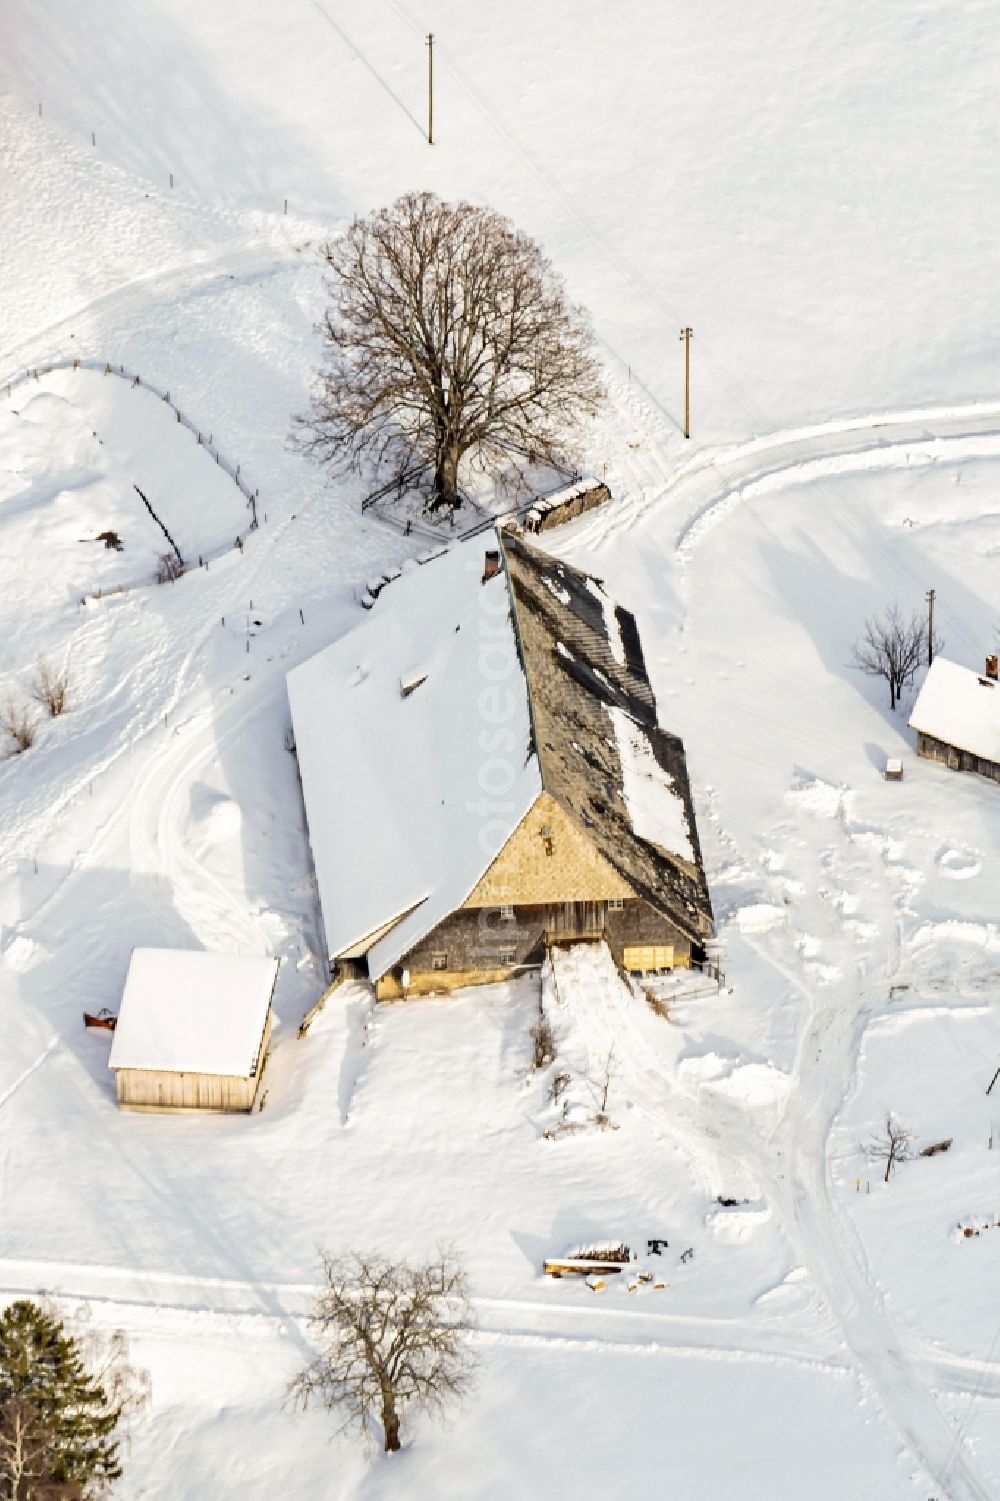 Oberried from above - Wintry snowy homestead and farm outbuildings on the edge of agricultural fields Schwarzwaldhof in Oberried in the state Baden-Wuerttemberg, Germany